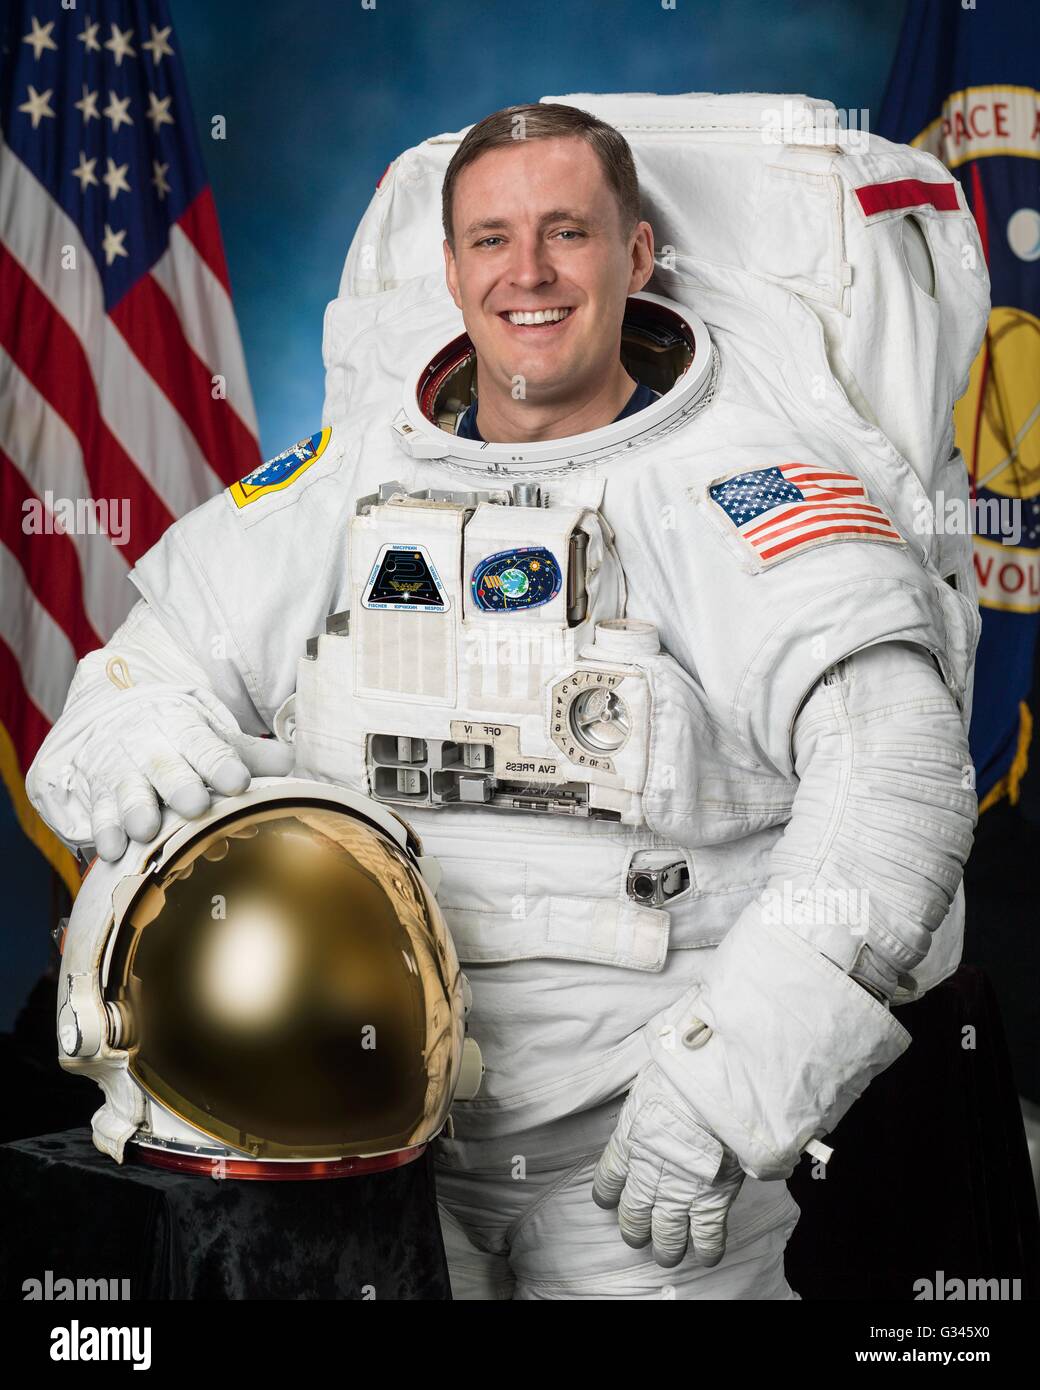 International Space Station Expedition 52 NASA astronaut Jack Fischer official portrait wearing the EMU space suit October 1, 2014 in Houston, Texas. Stock Photo